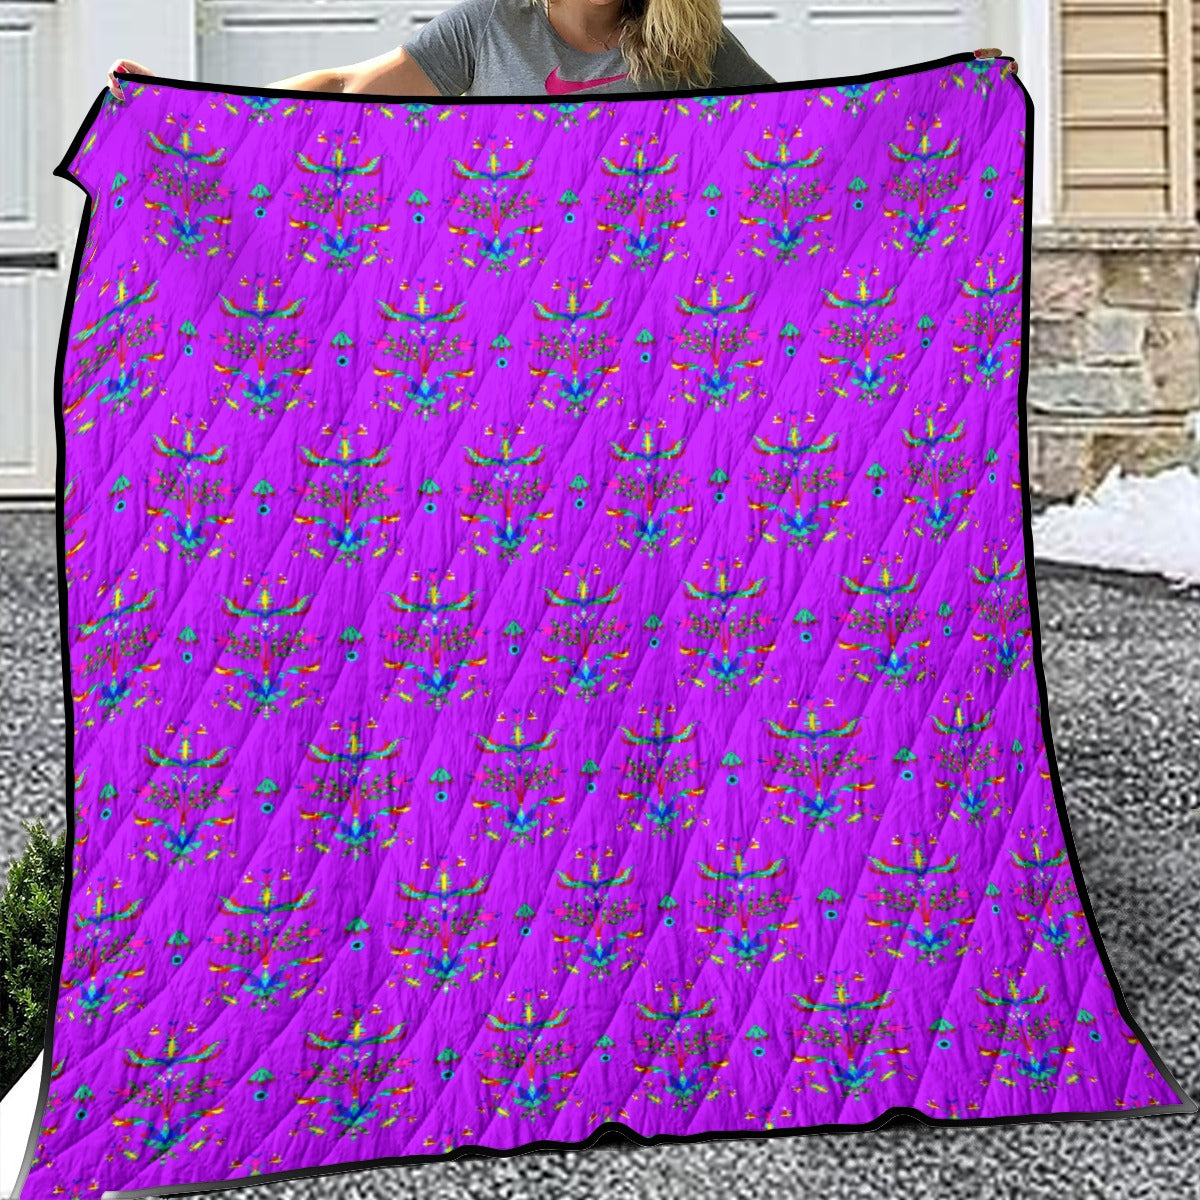 Dakota Damask Purple Lightweight & Breathable Quilt With Edge-wrapping Strips